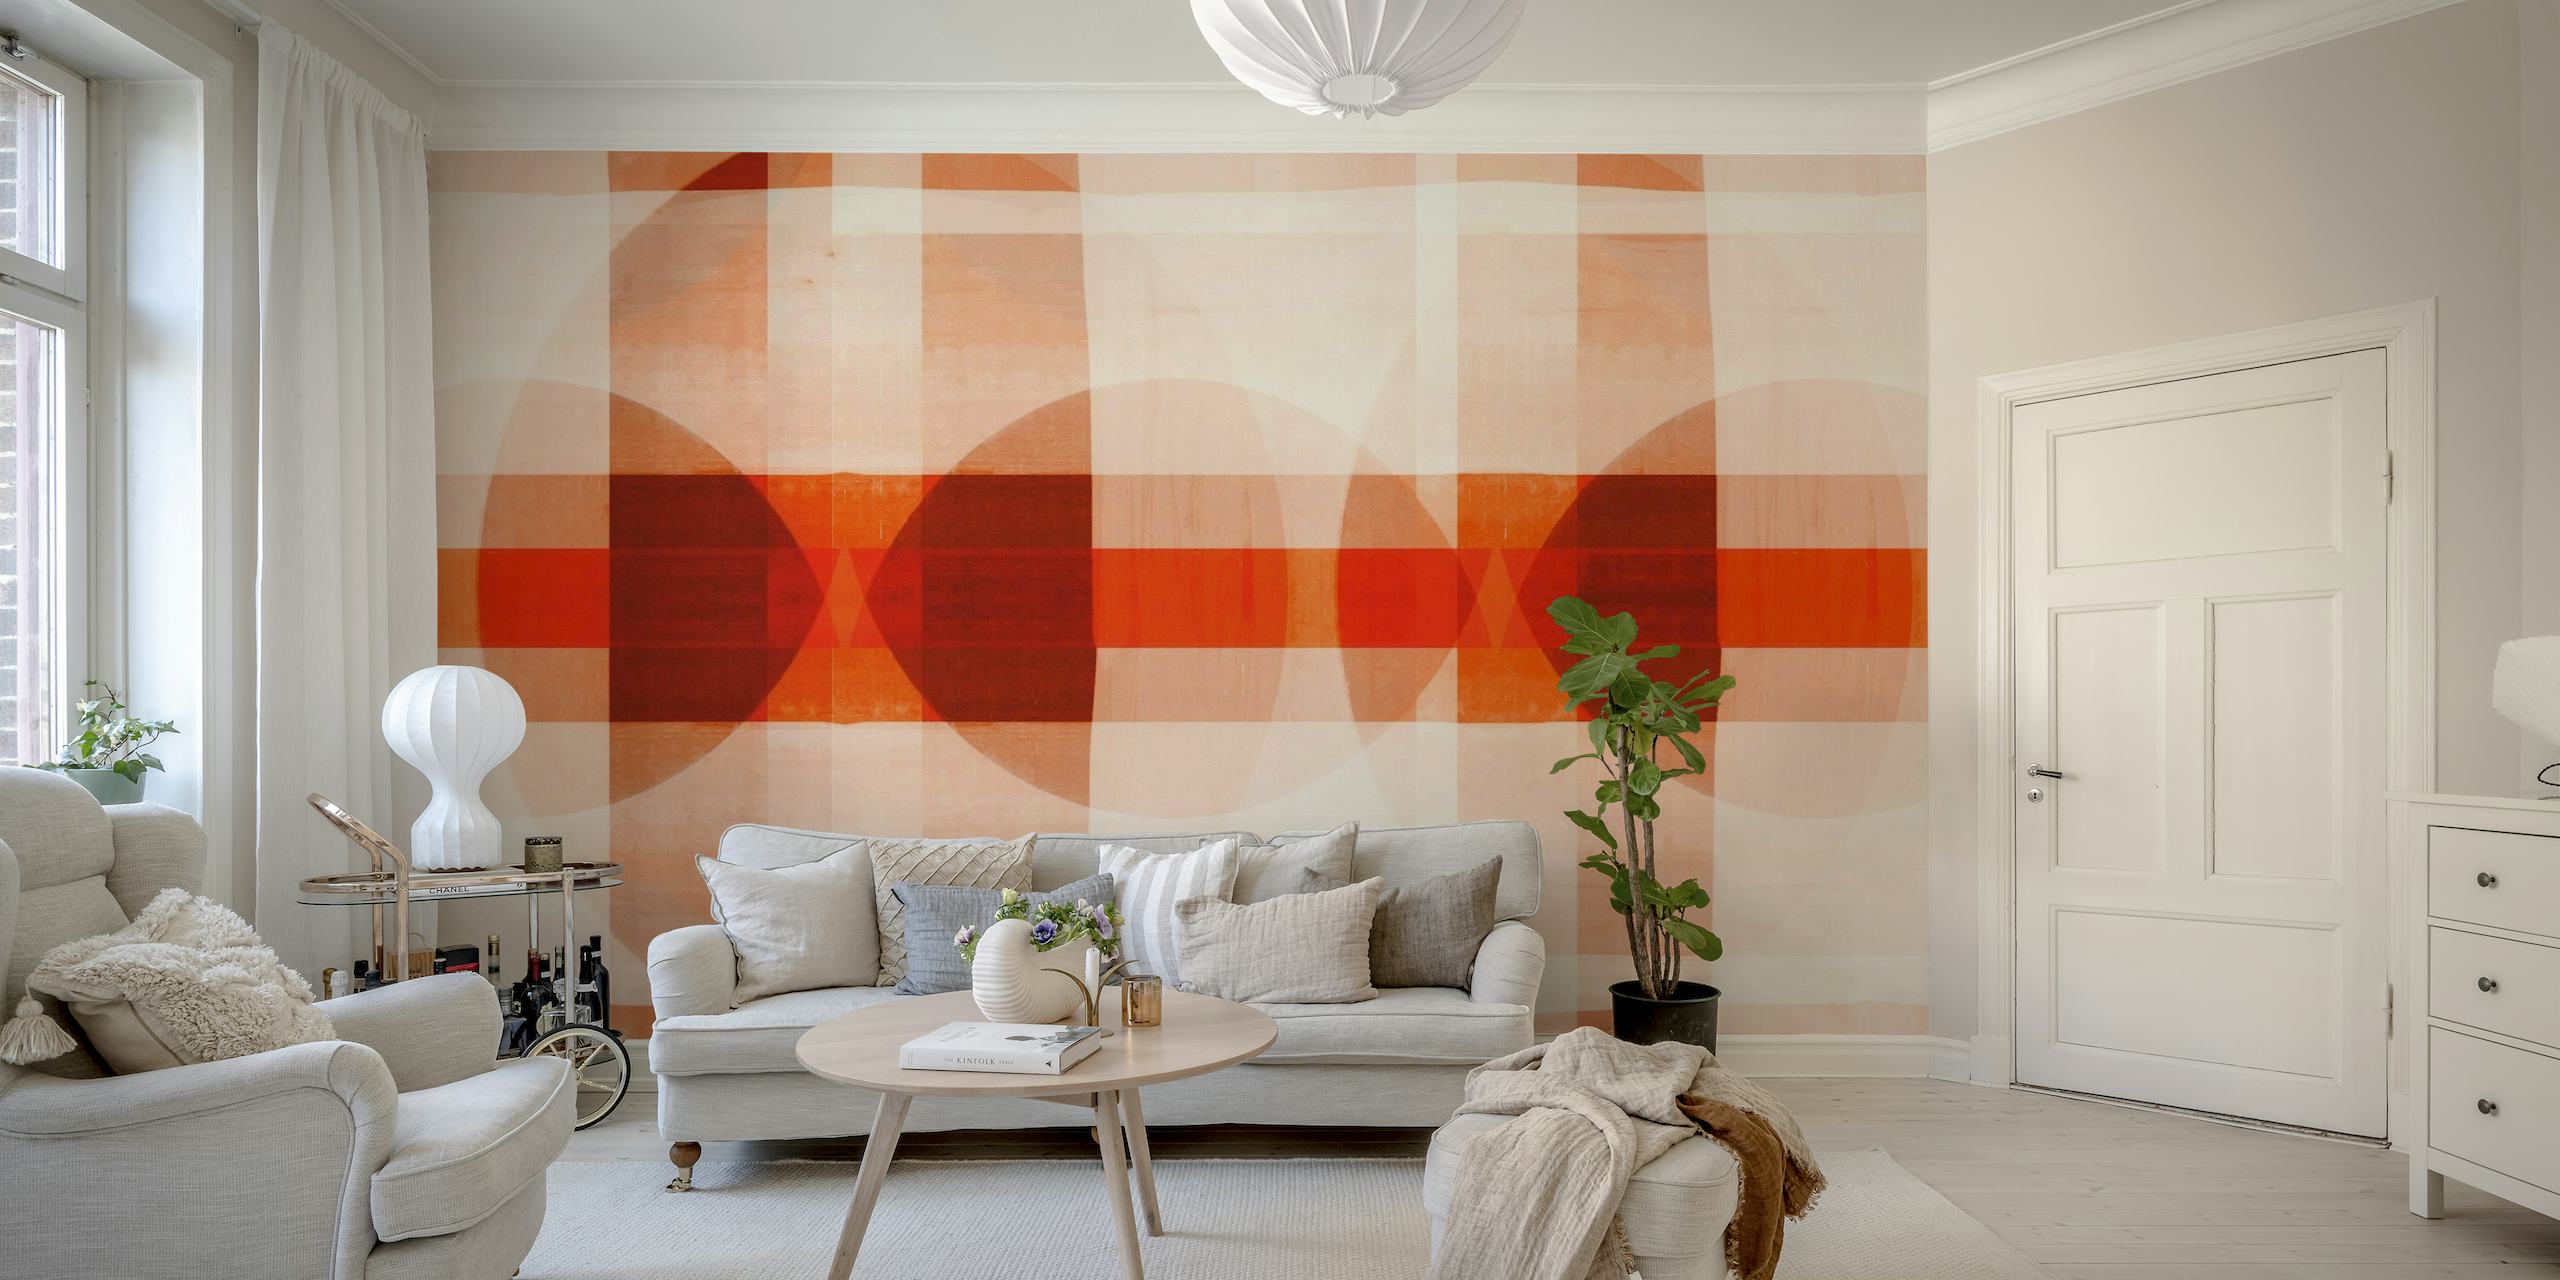 Bauhaus-inspired mosaic wall mural with geometric patterns in warm colors